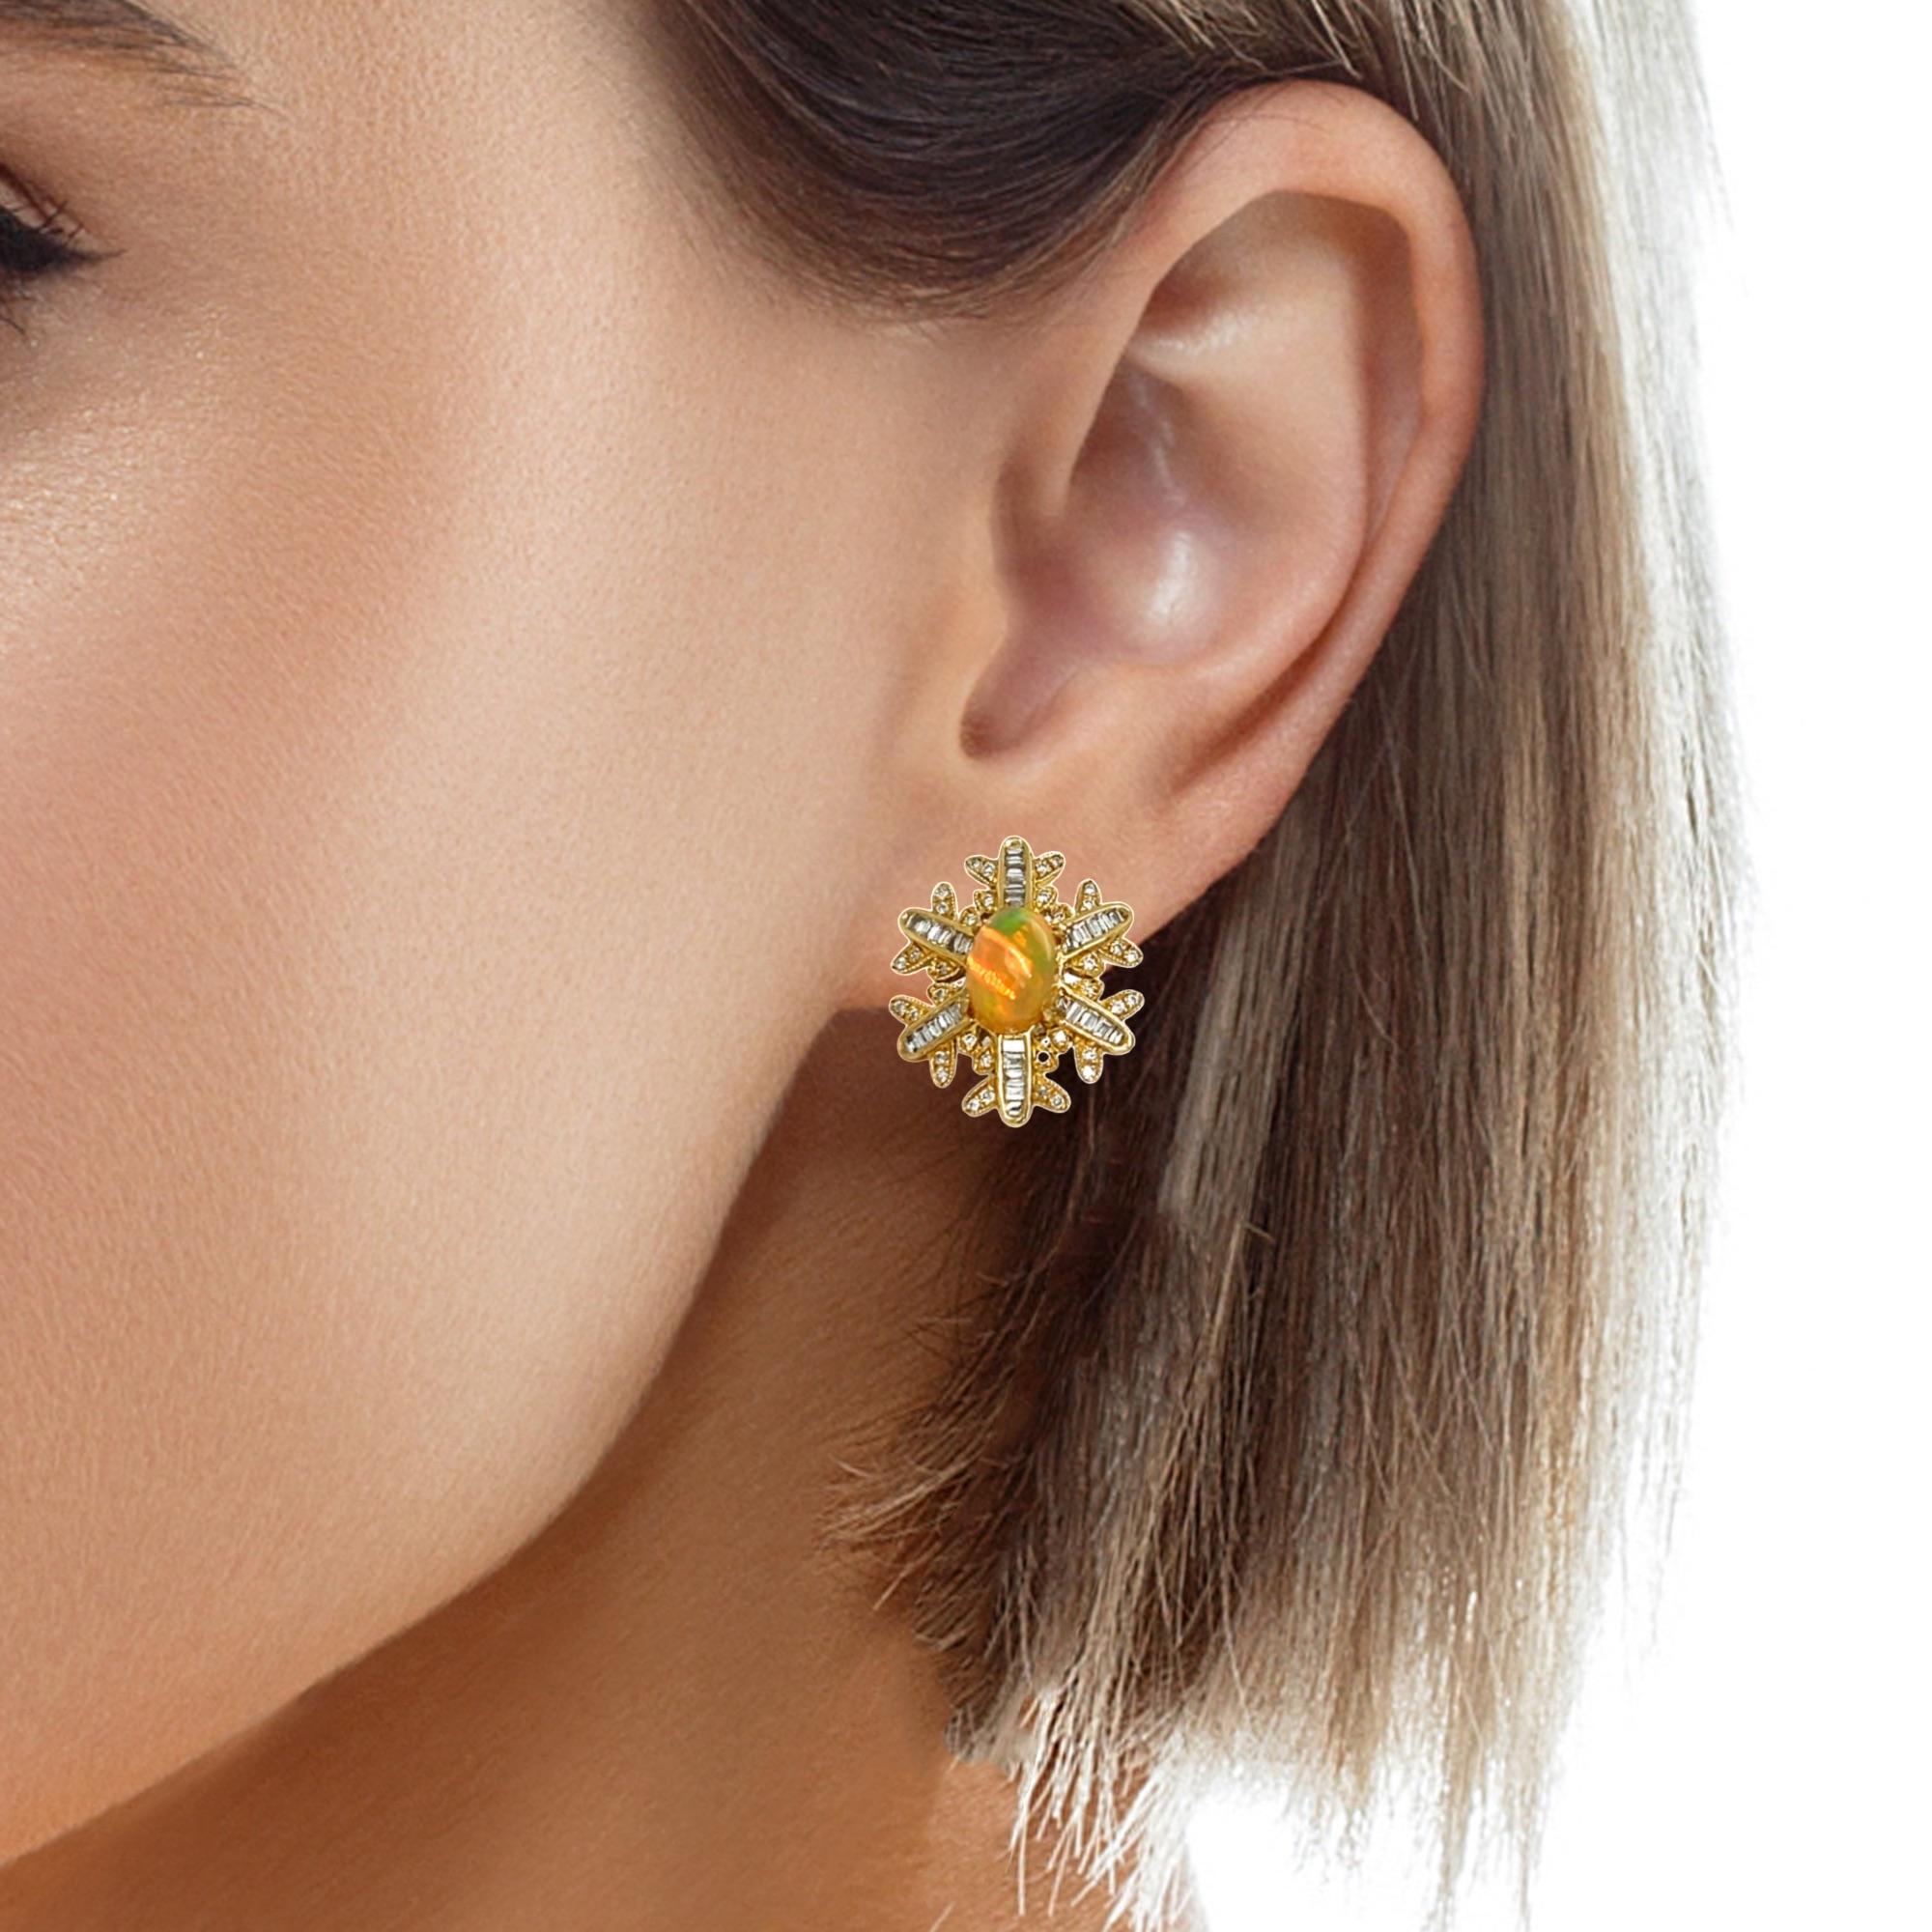 These stunning Ethiopian Opal and diamond snow flake earrings are a beautiful accessory for any event. The oval opal has a 4 prong setting in 14 karat yellow gold. There are sparkling baguette and round diamonds surrounding the opal for a beautiful